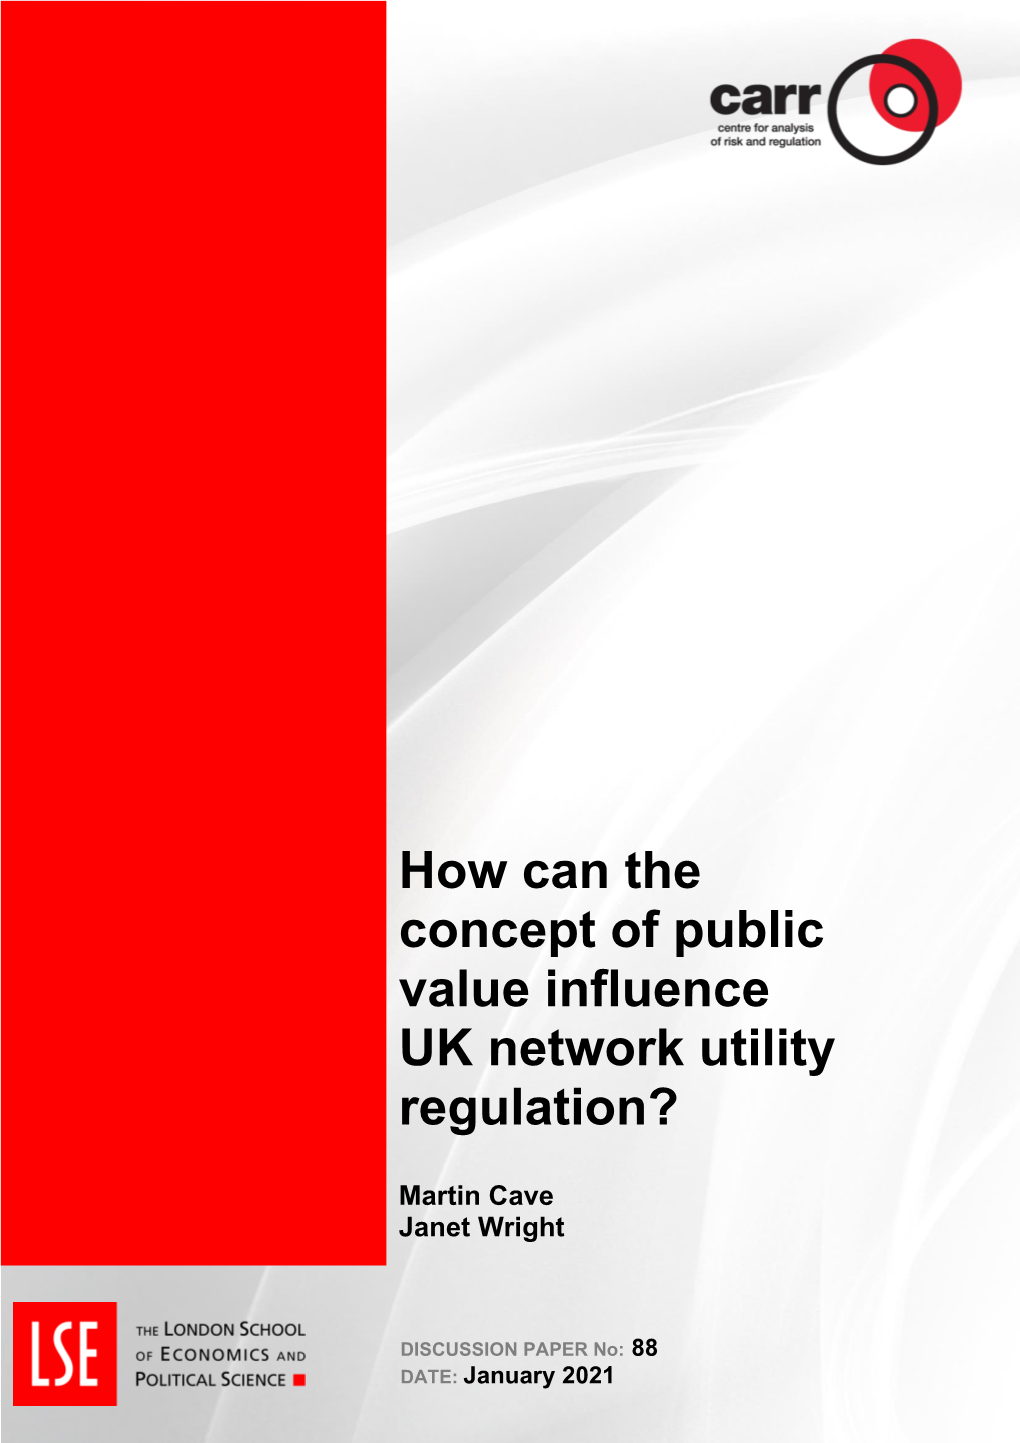 How Can the Concept of Public Value Influence UK Network Utility Regulation?